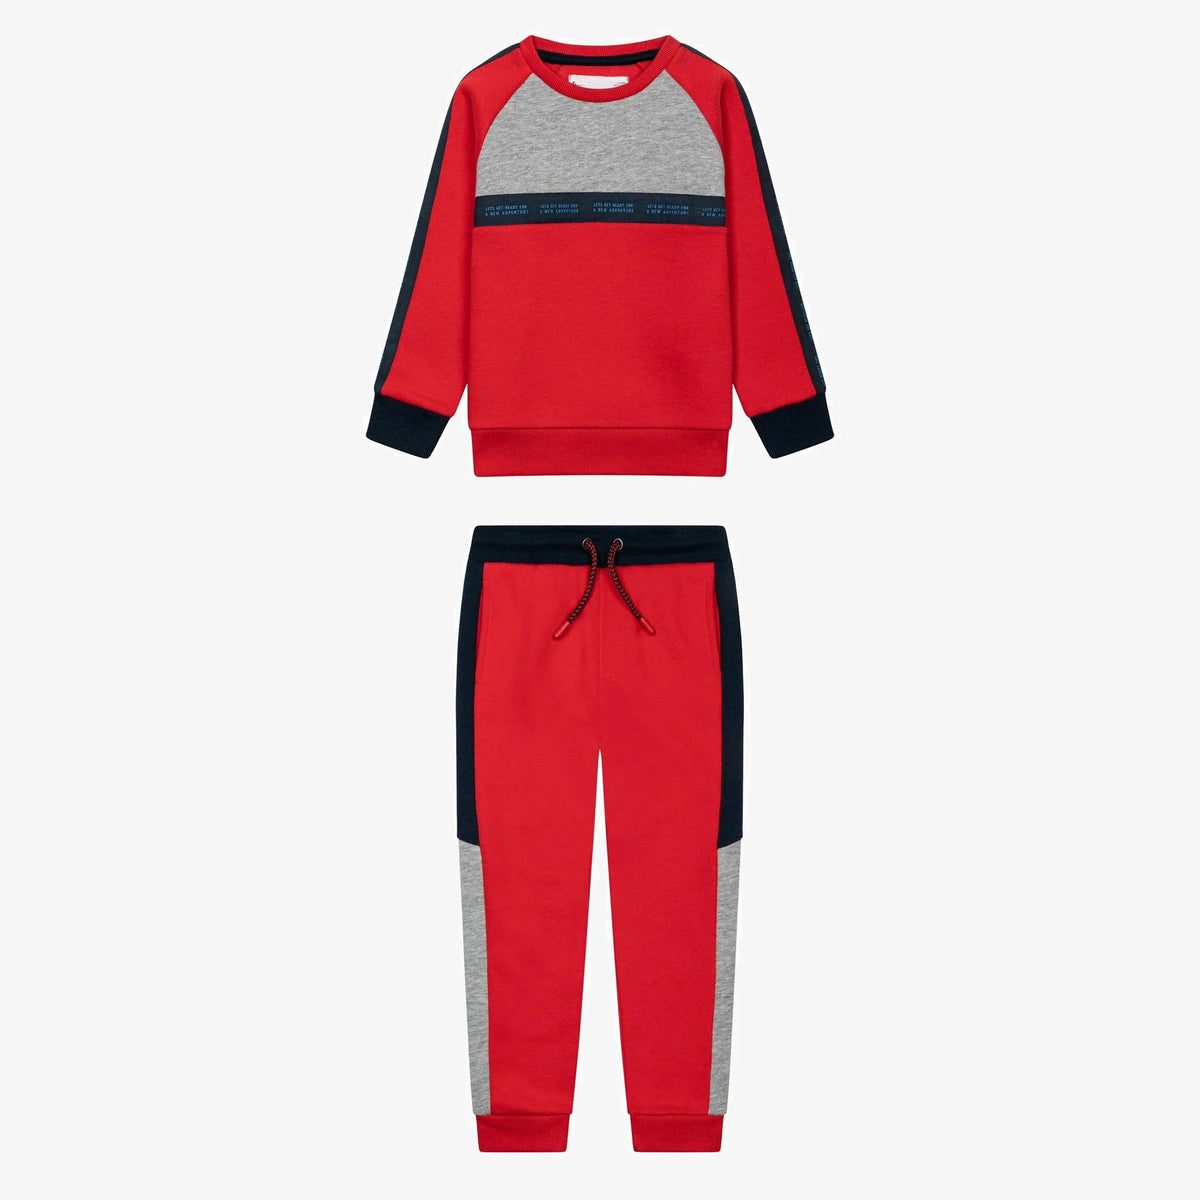 Premium Quality Canvas Printed Red Fleece TrackSuit For Kids